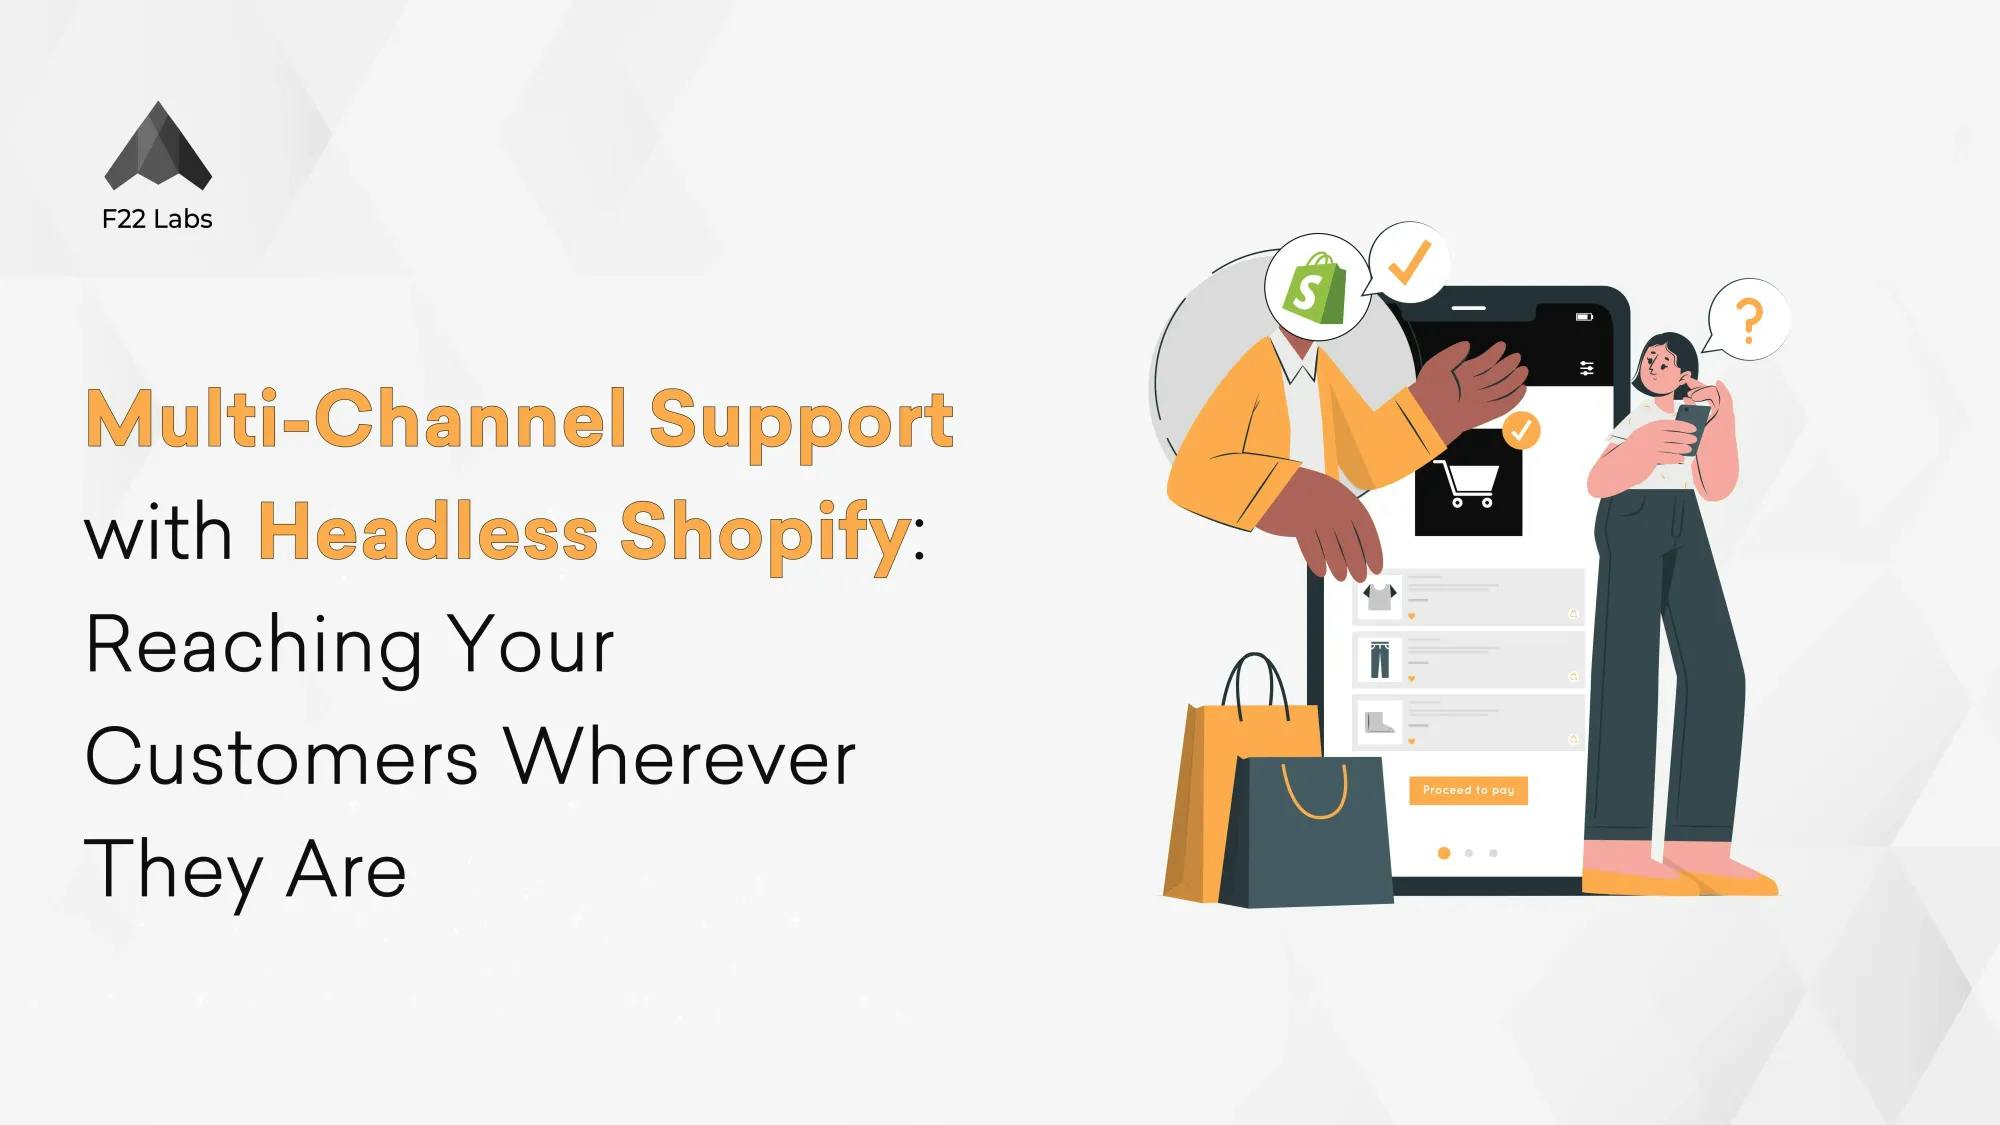 Multi-Channel Support with Headless Shopify: Reaching Your Customers Wherever They Are Hero